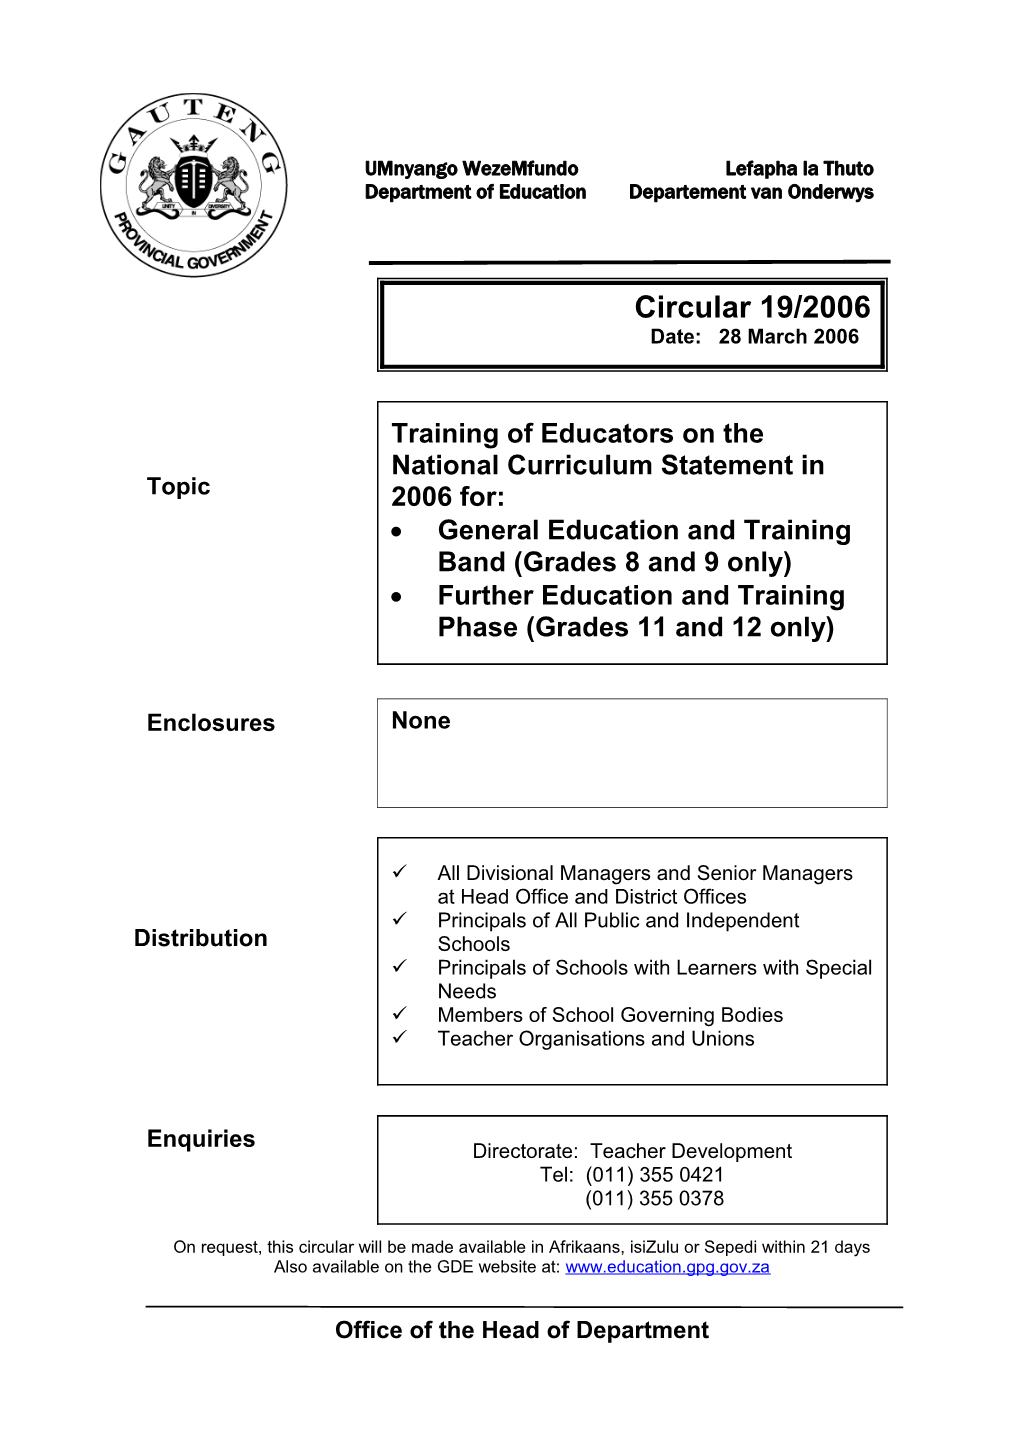 Circular 19.2006 Training of Educators on the National Curriculum Statement in 2006